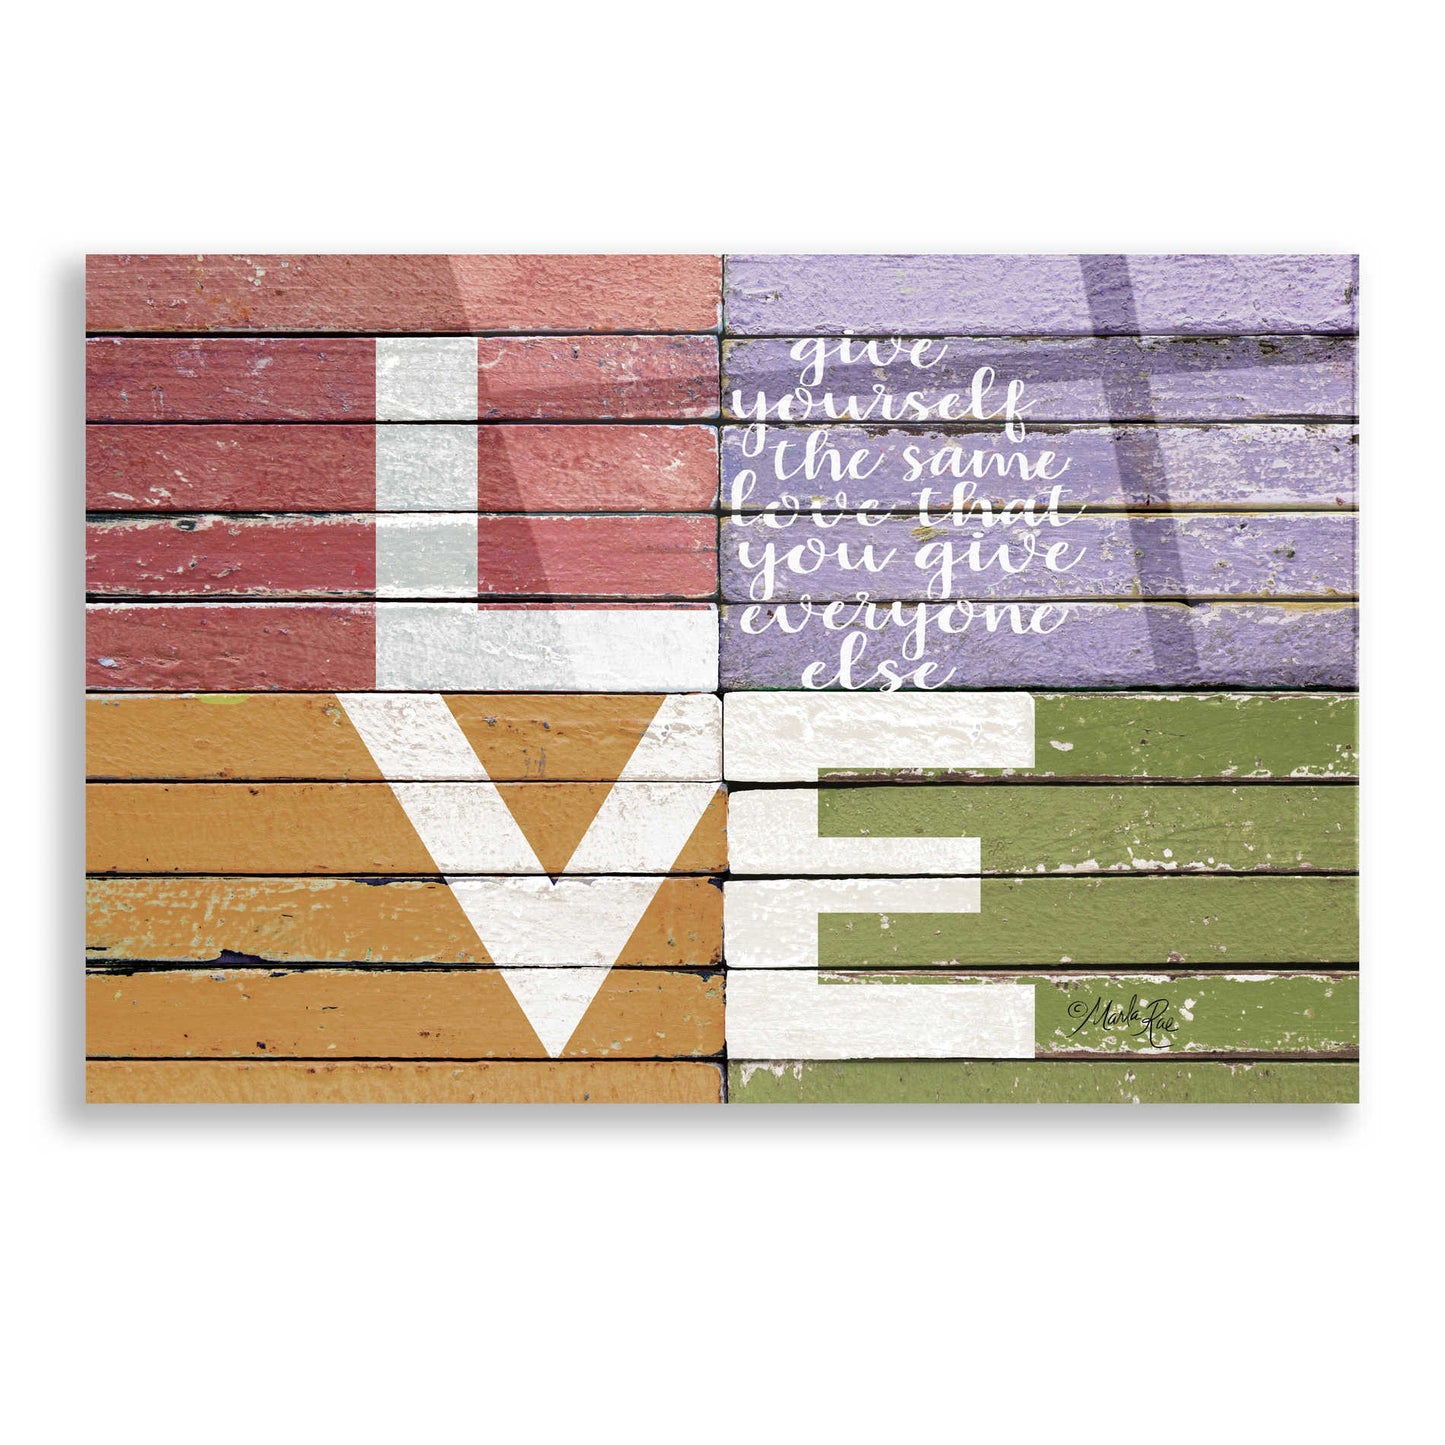 Epic Art 'Give Yourself the Same Love' by Marla Rae, Acrylic Glass Wall Art,16x12